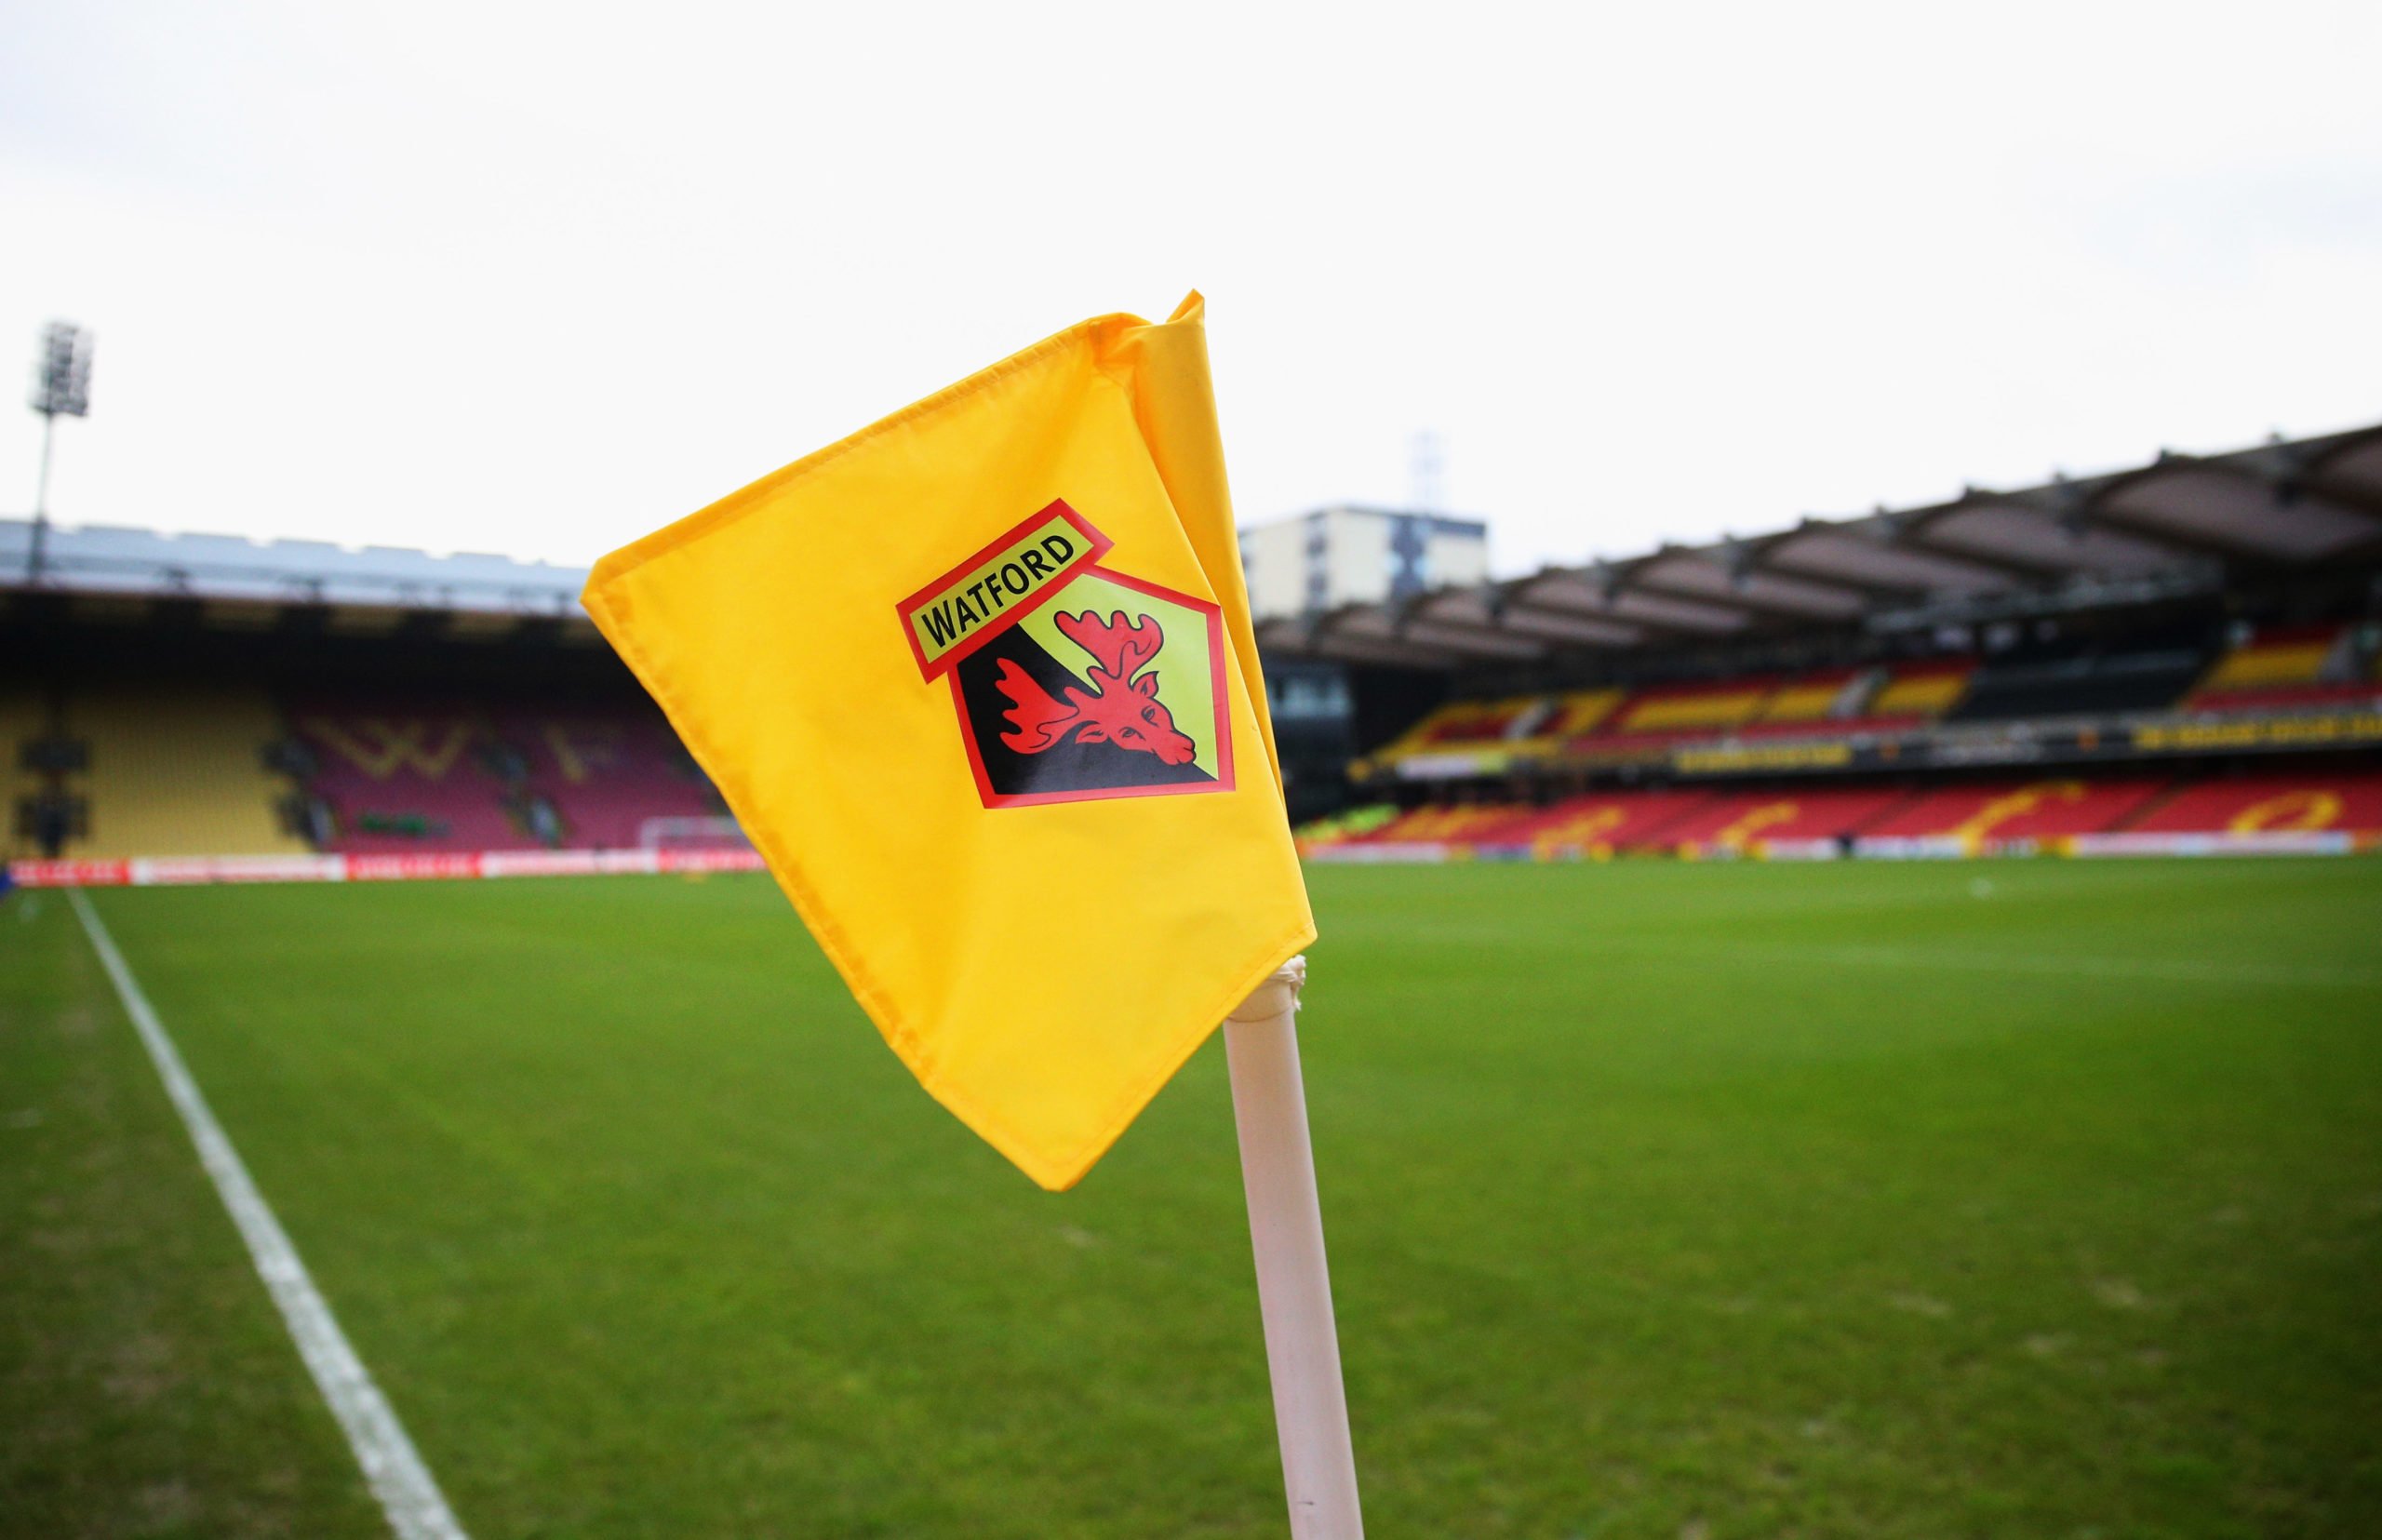 Watford give clear indication about whether West Ham game will go ahead after Covid outbreak